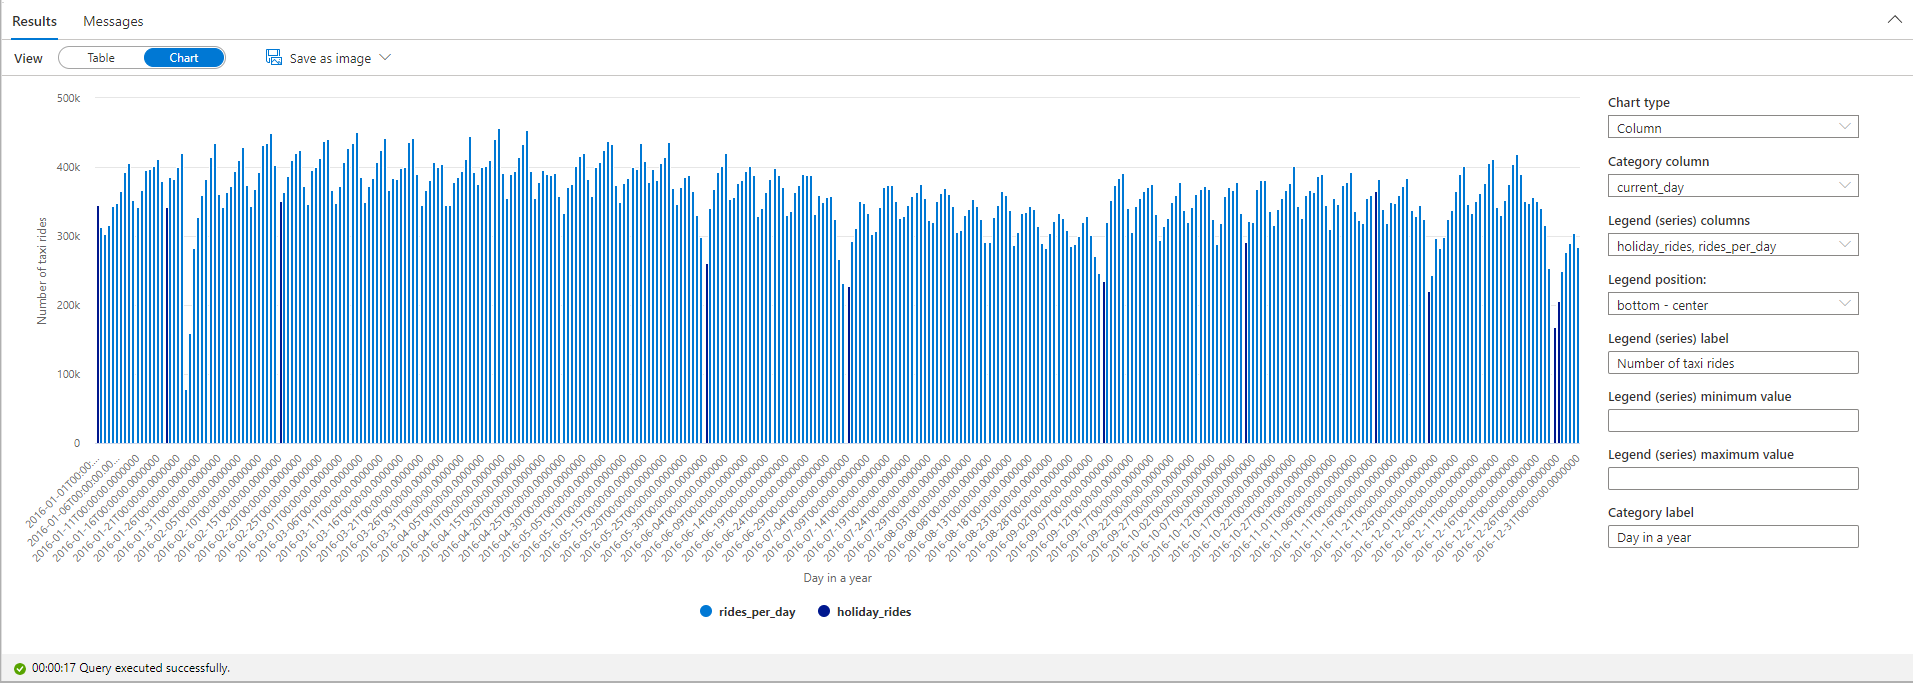 Screenshot shows the number of taxi rides during public holidays as a plot chart.